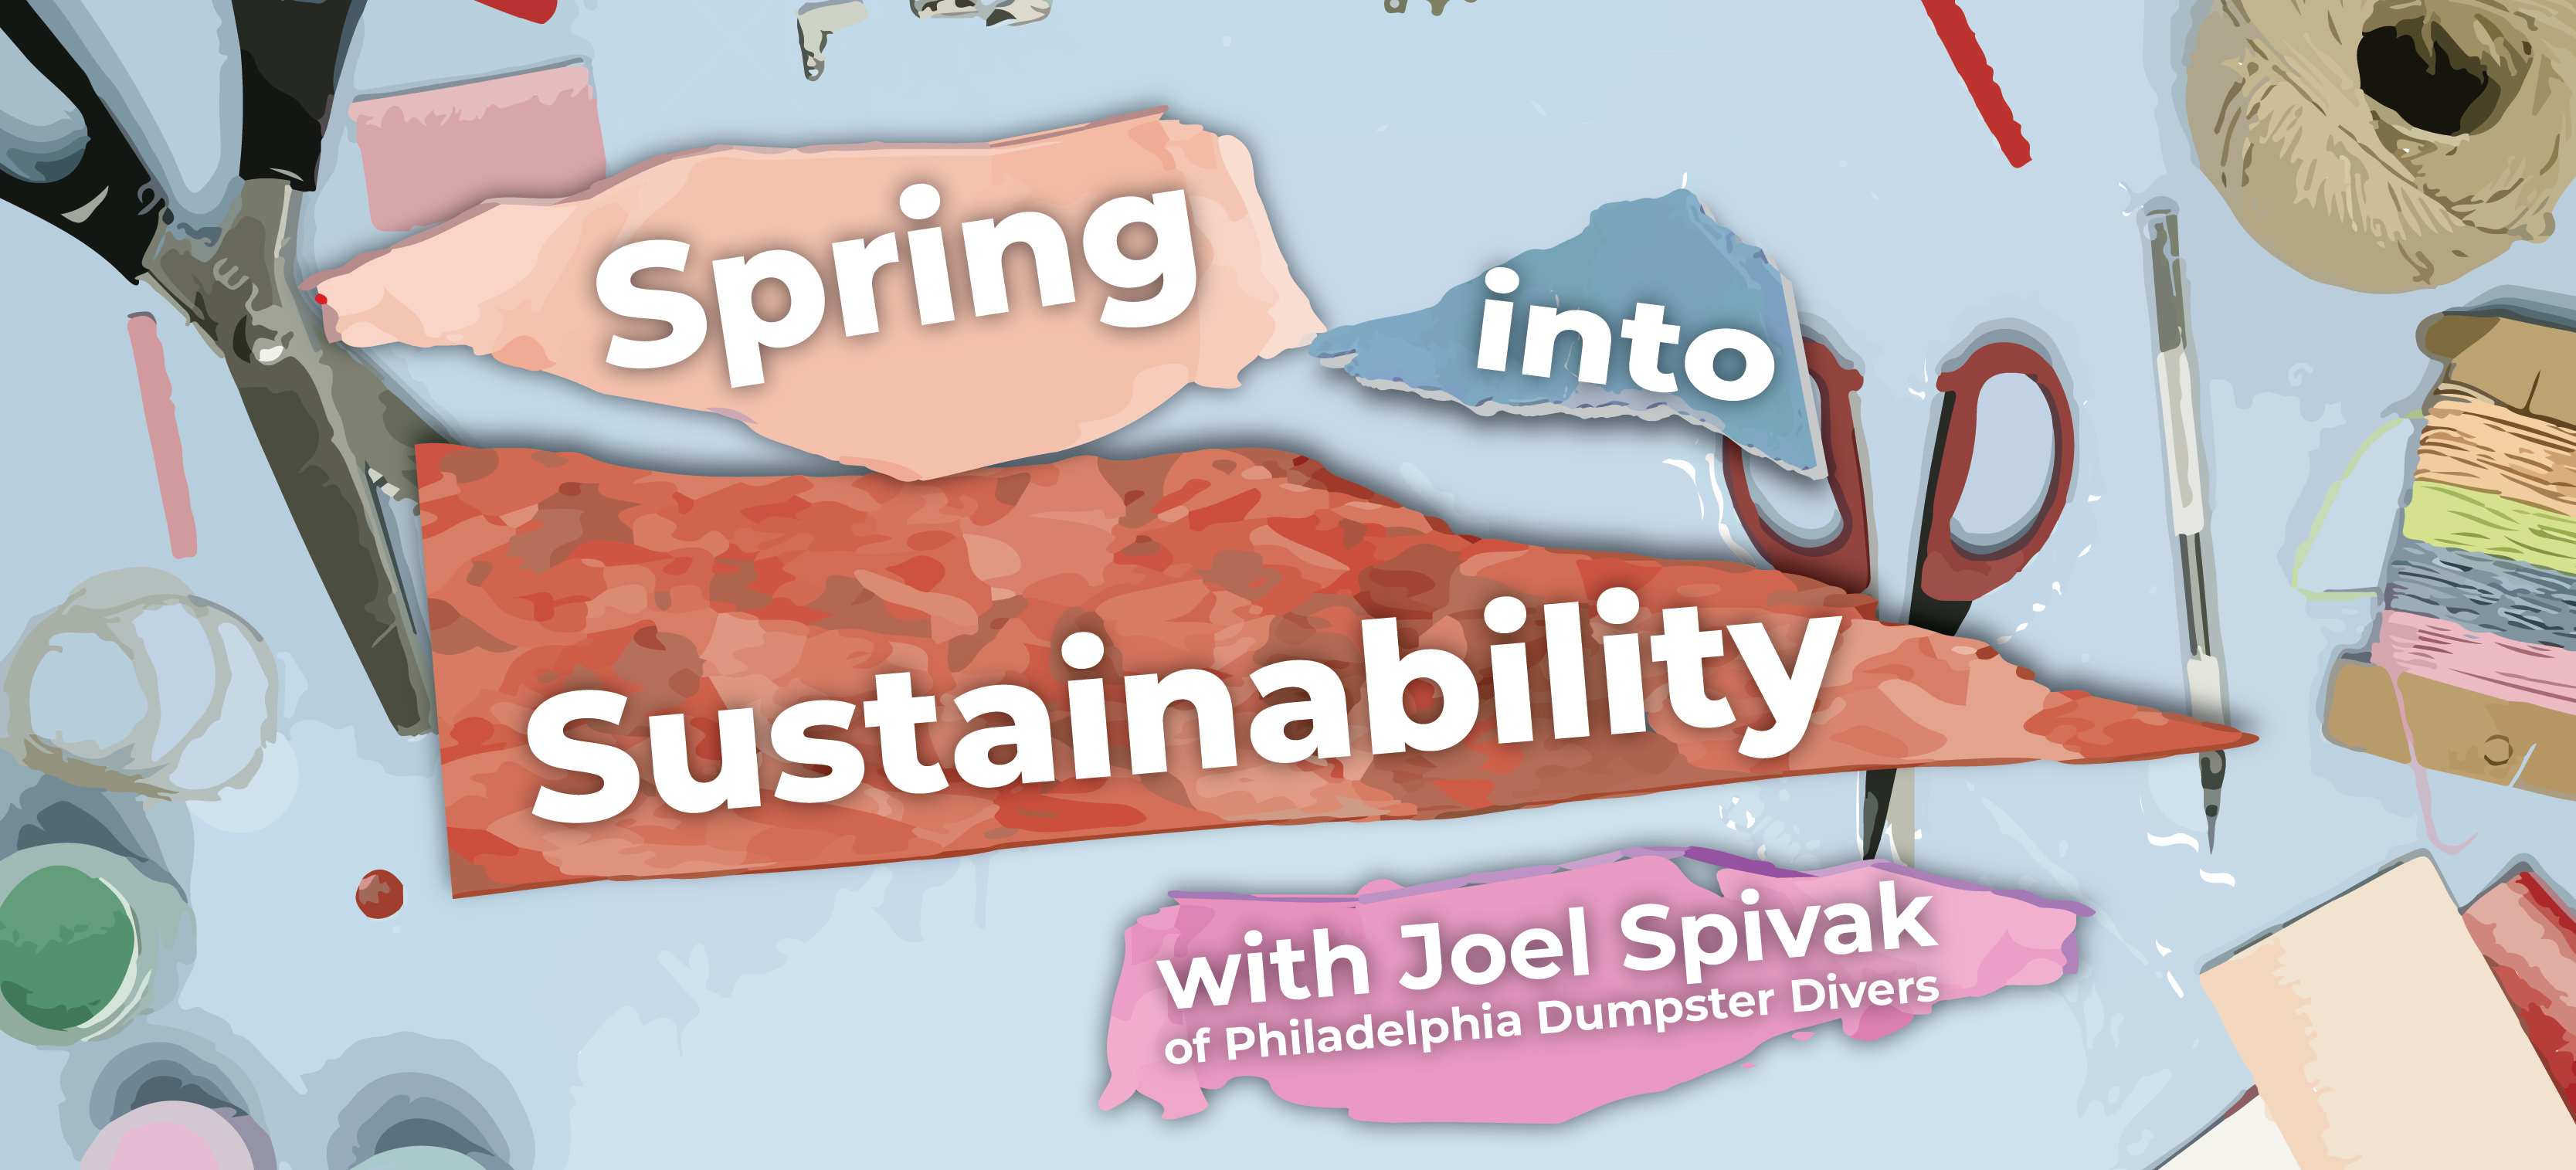 Spring into Sustainability banner